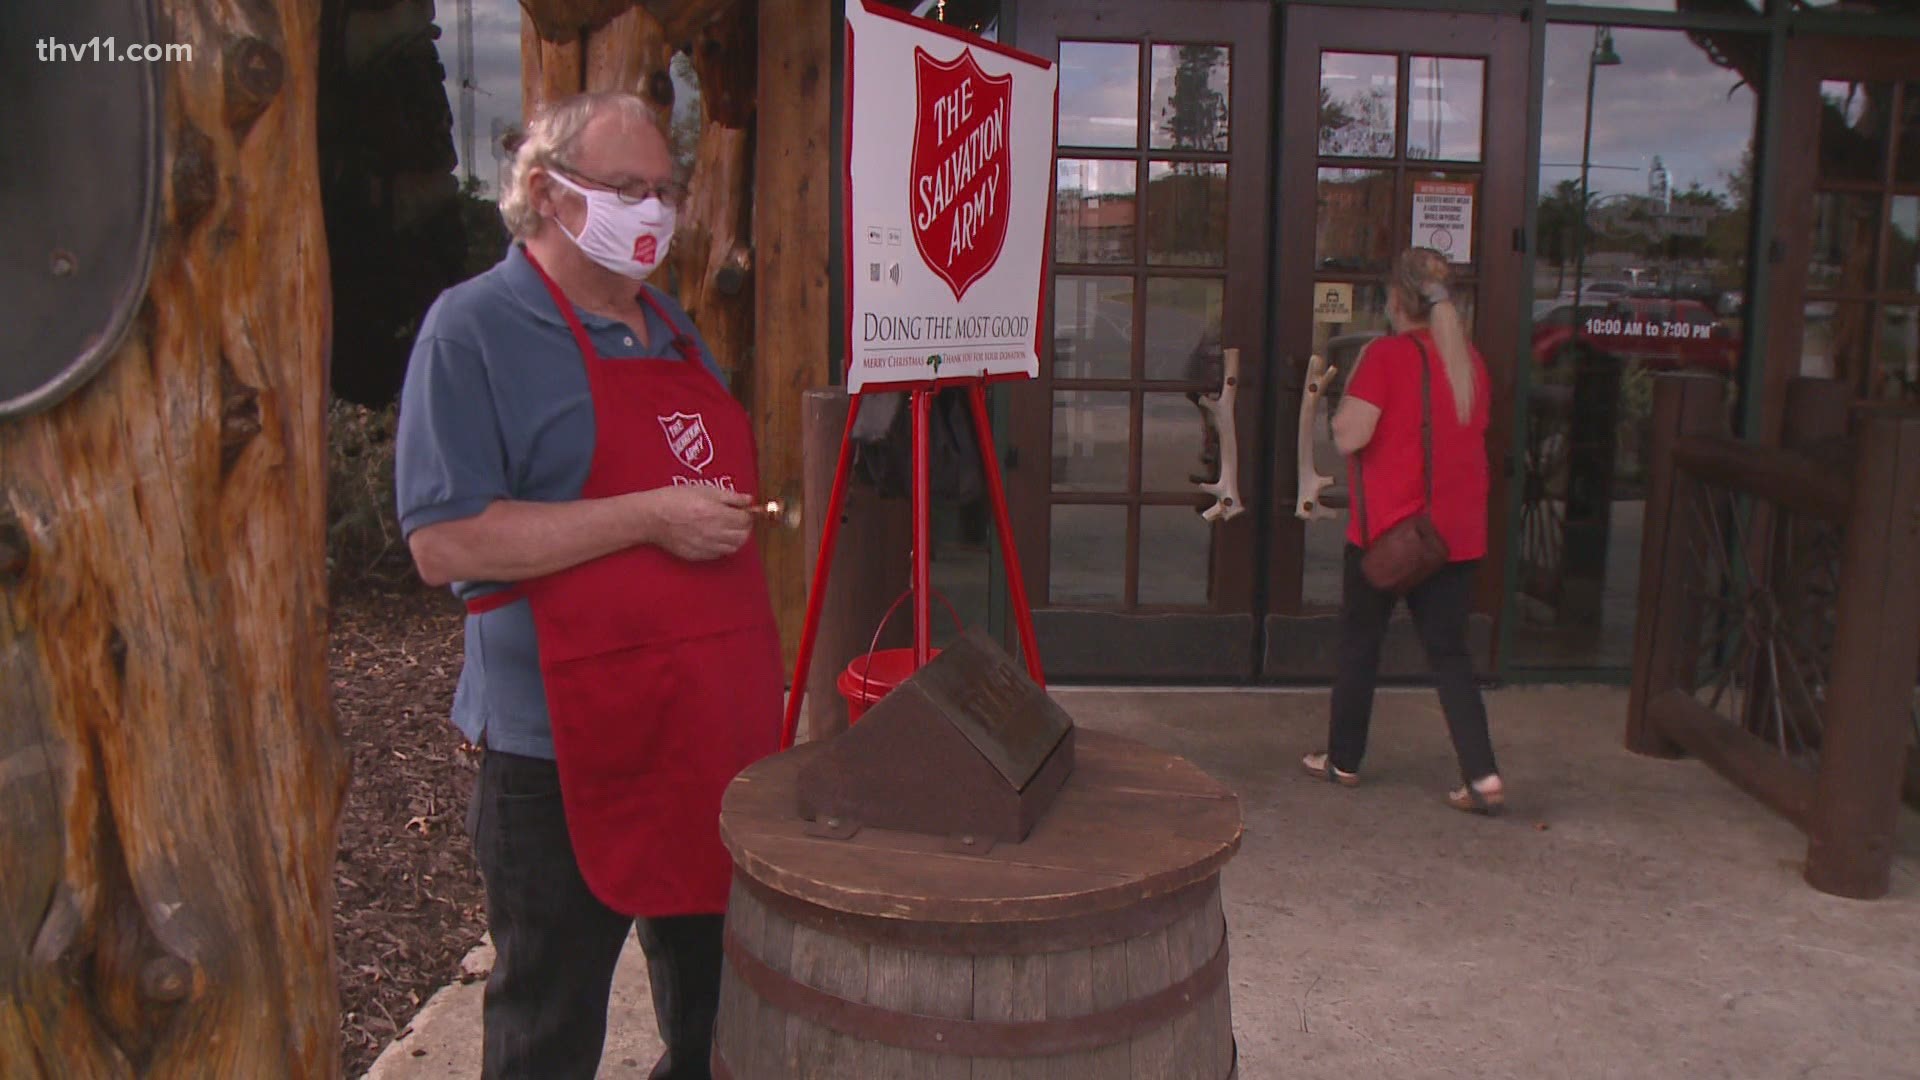 The Salvation Army's biggest fundraising event of the year is here, and it's a little early.